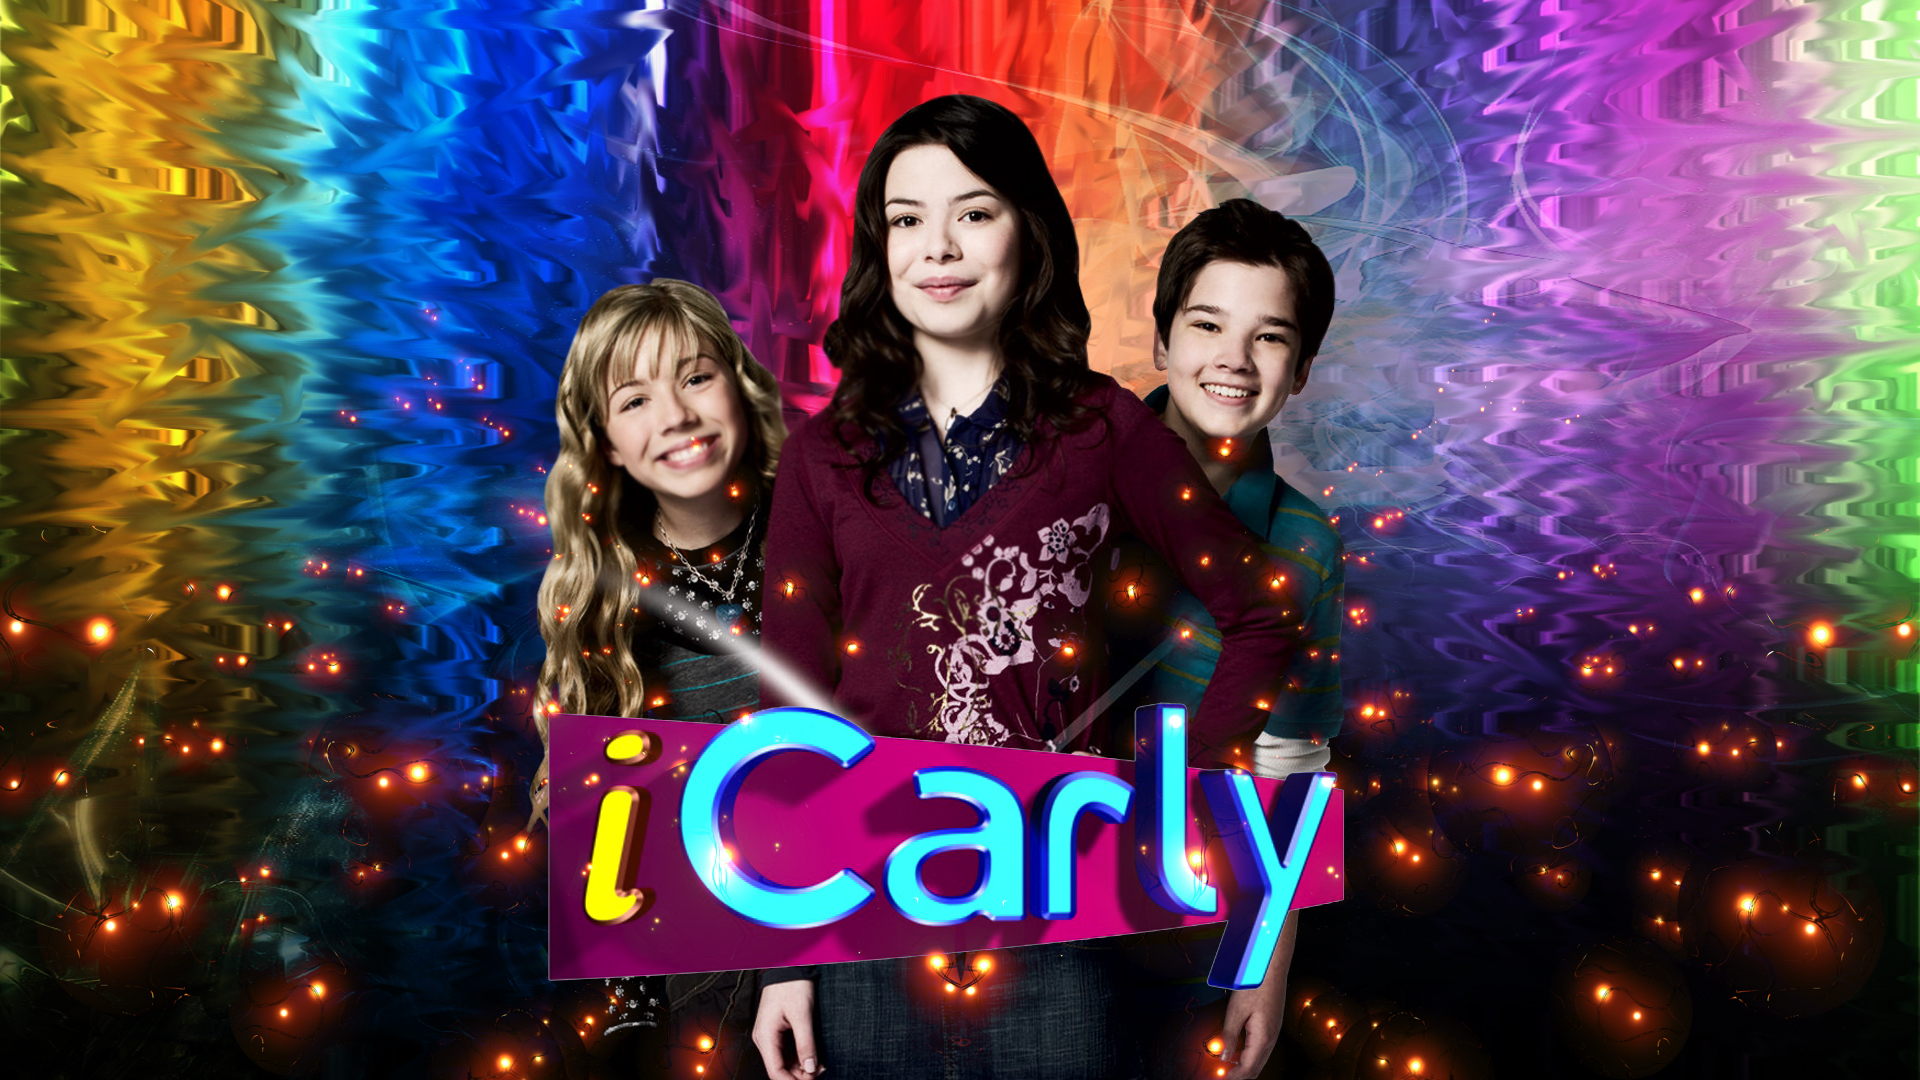 Wallpaper Icarly By Guilherme2502